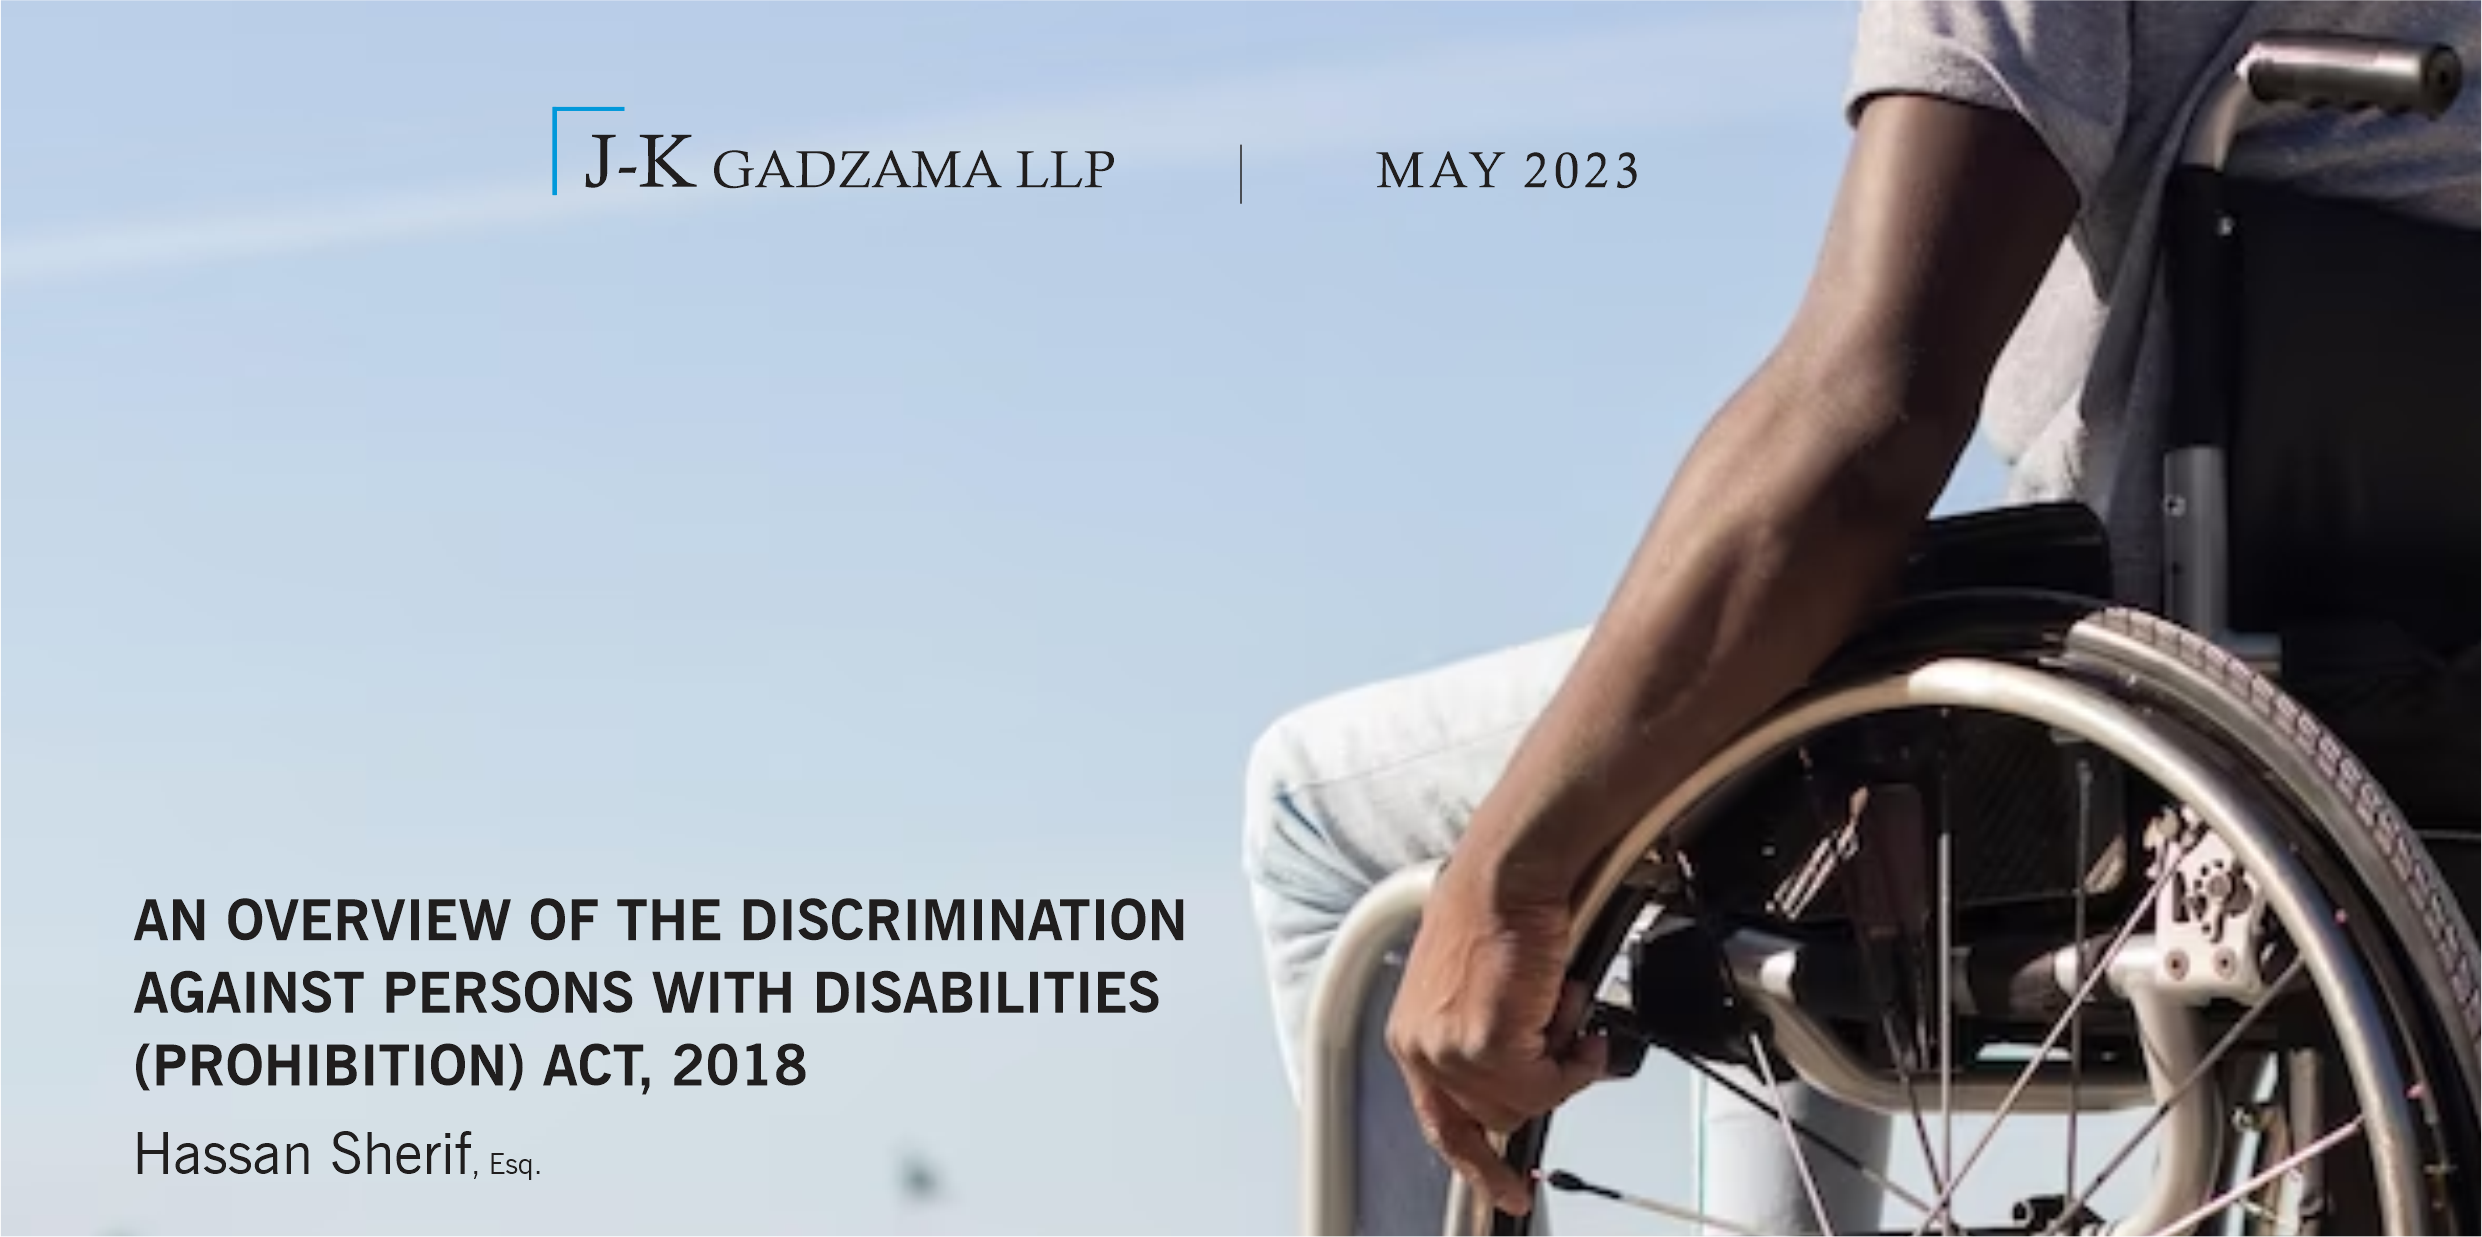 An Overview of the Discrimination Against Persons with Disabilities